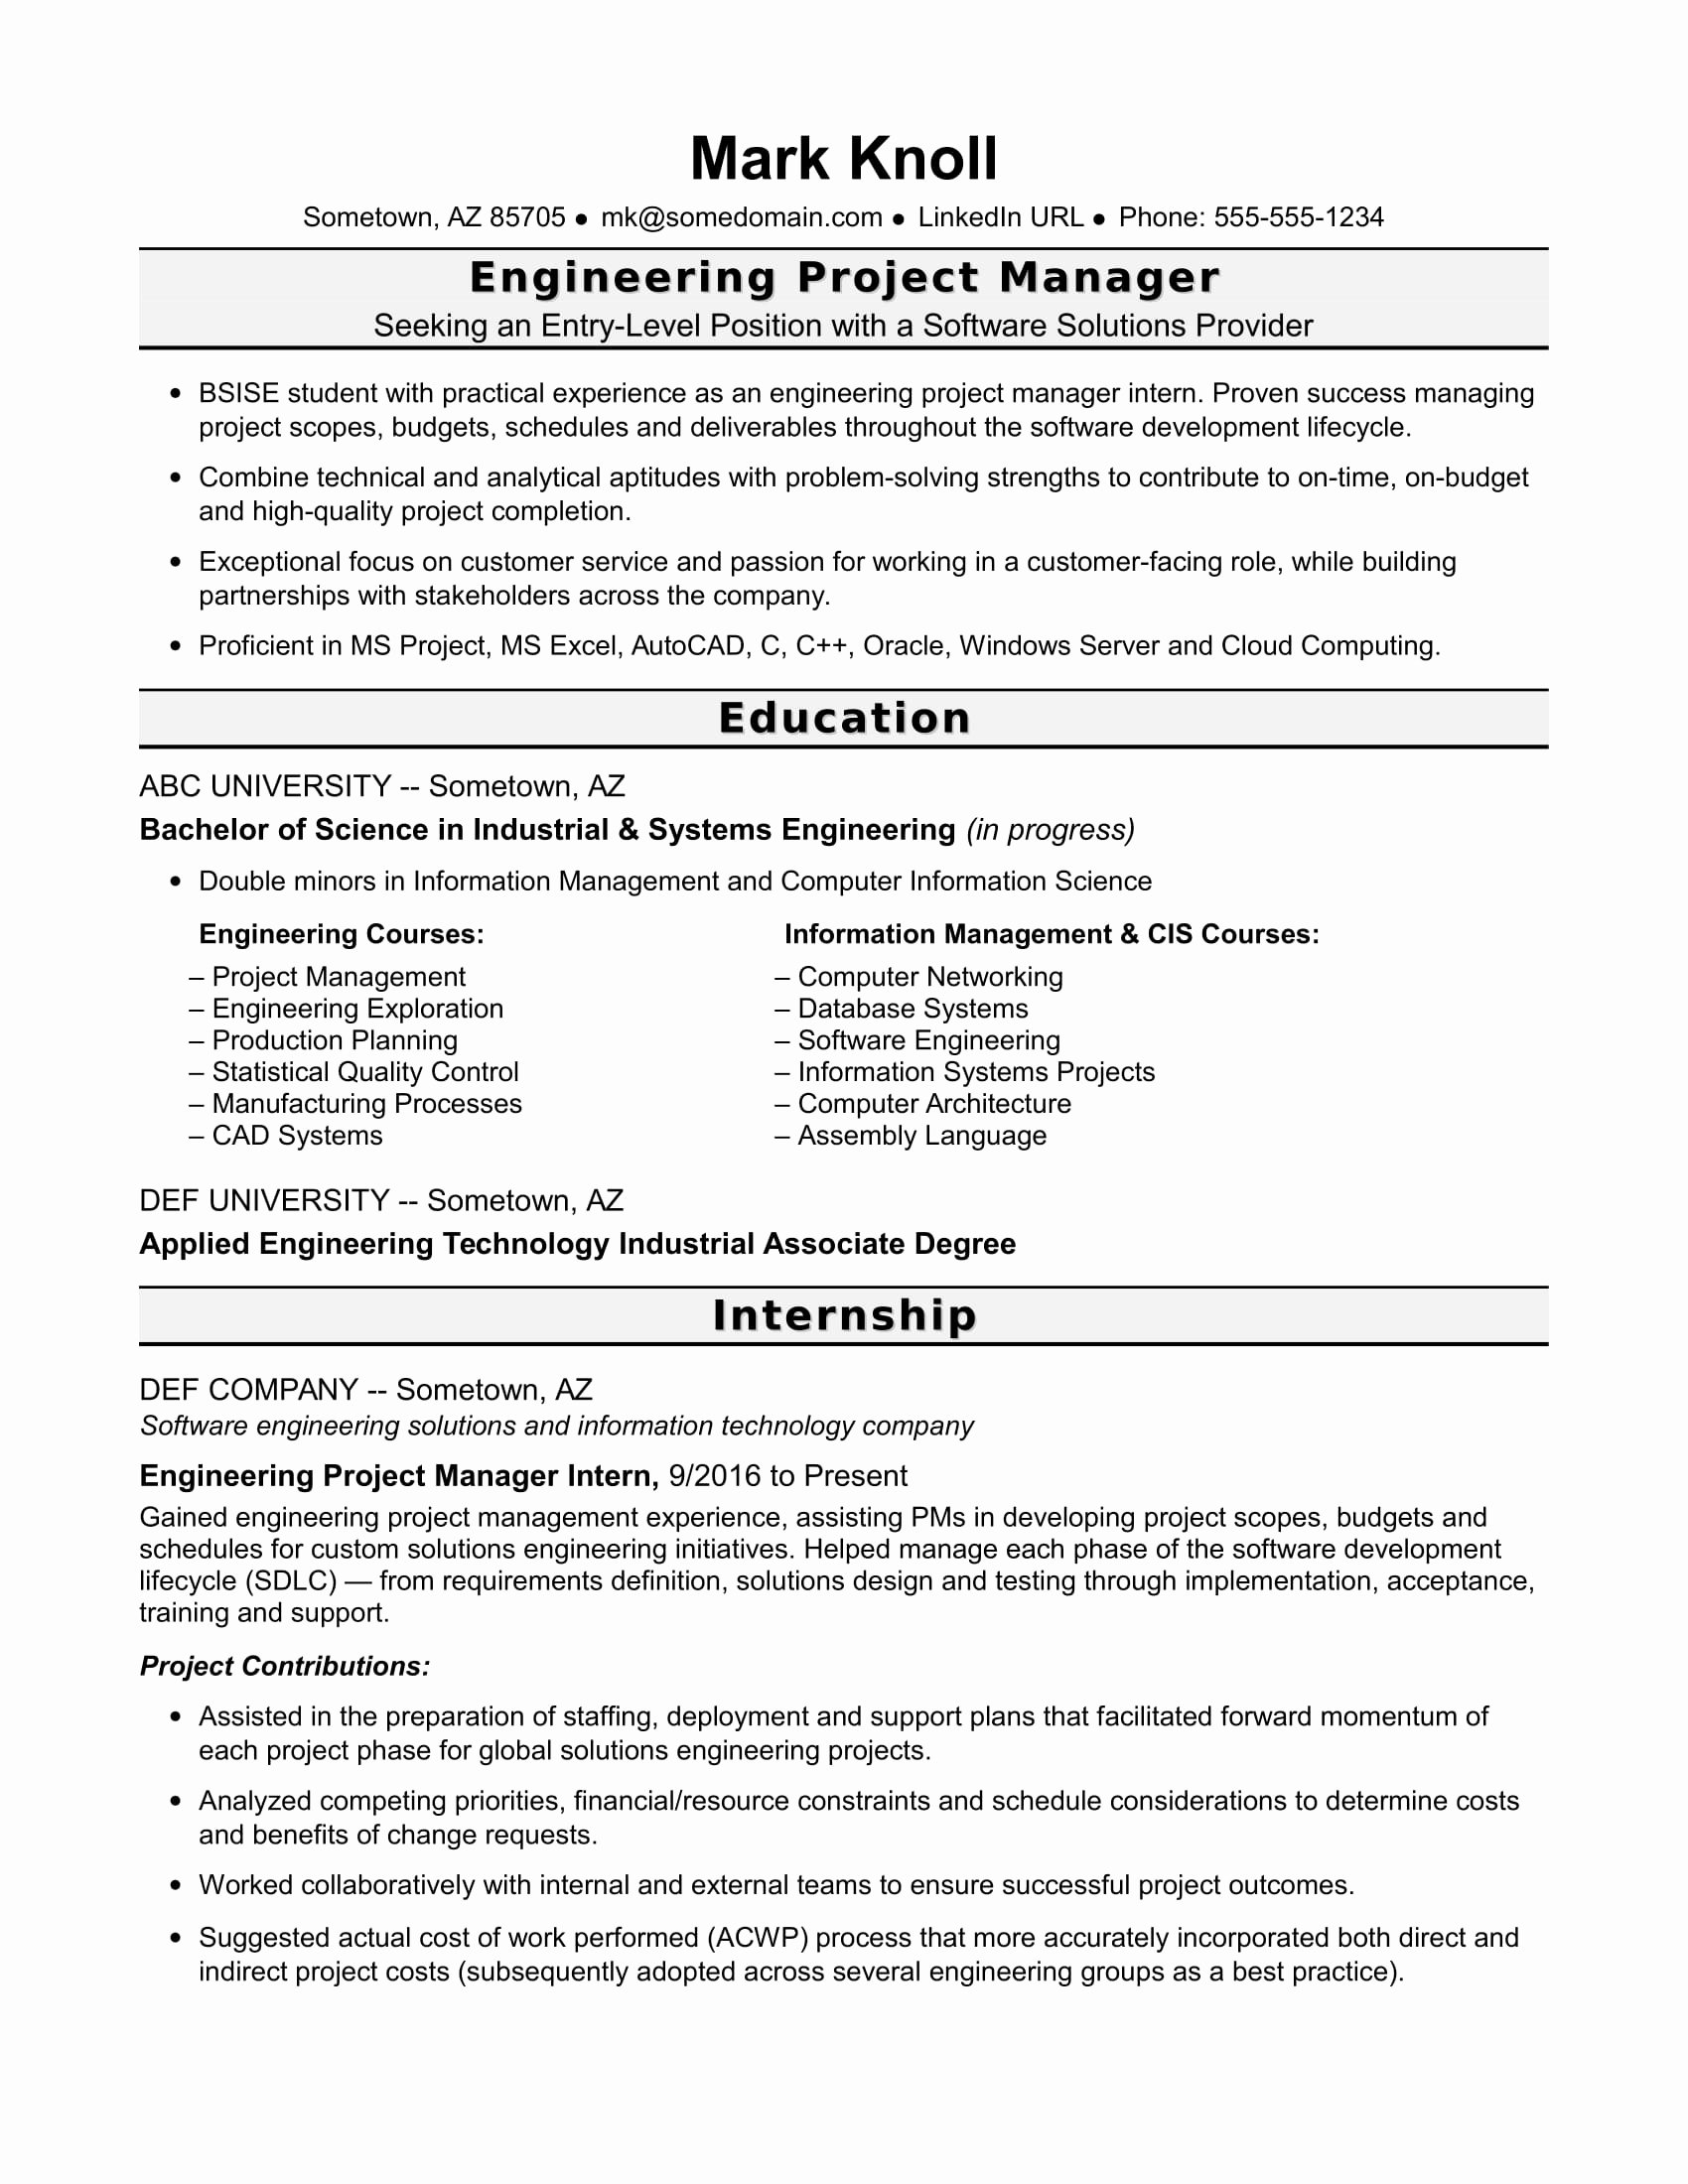 Sample Resume for An Entry Level Engineering Project